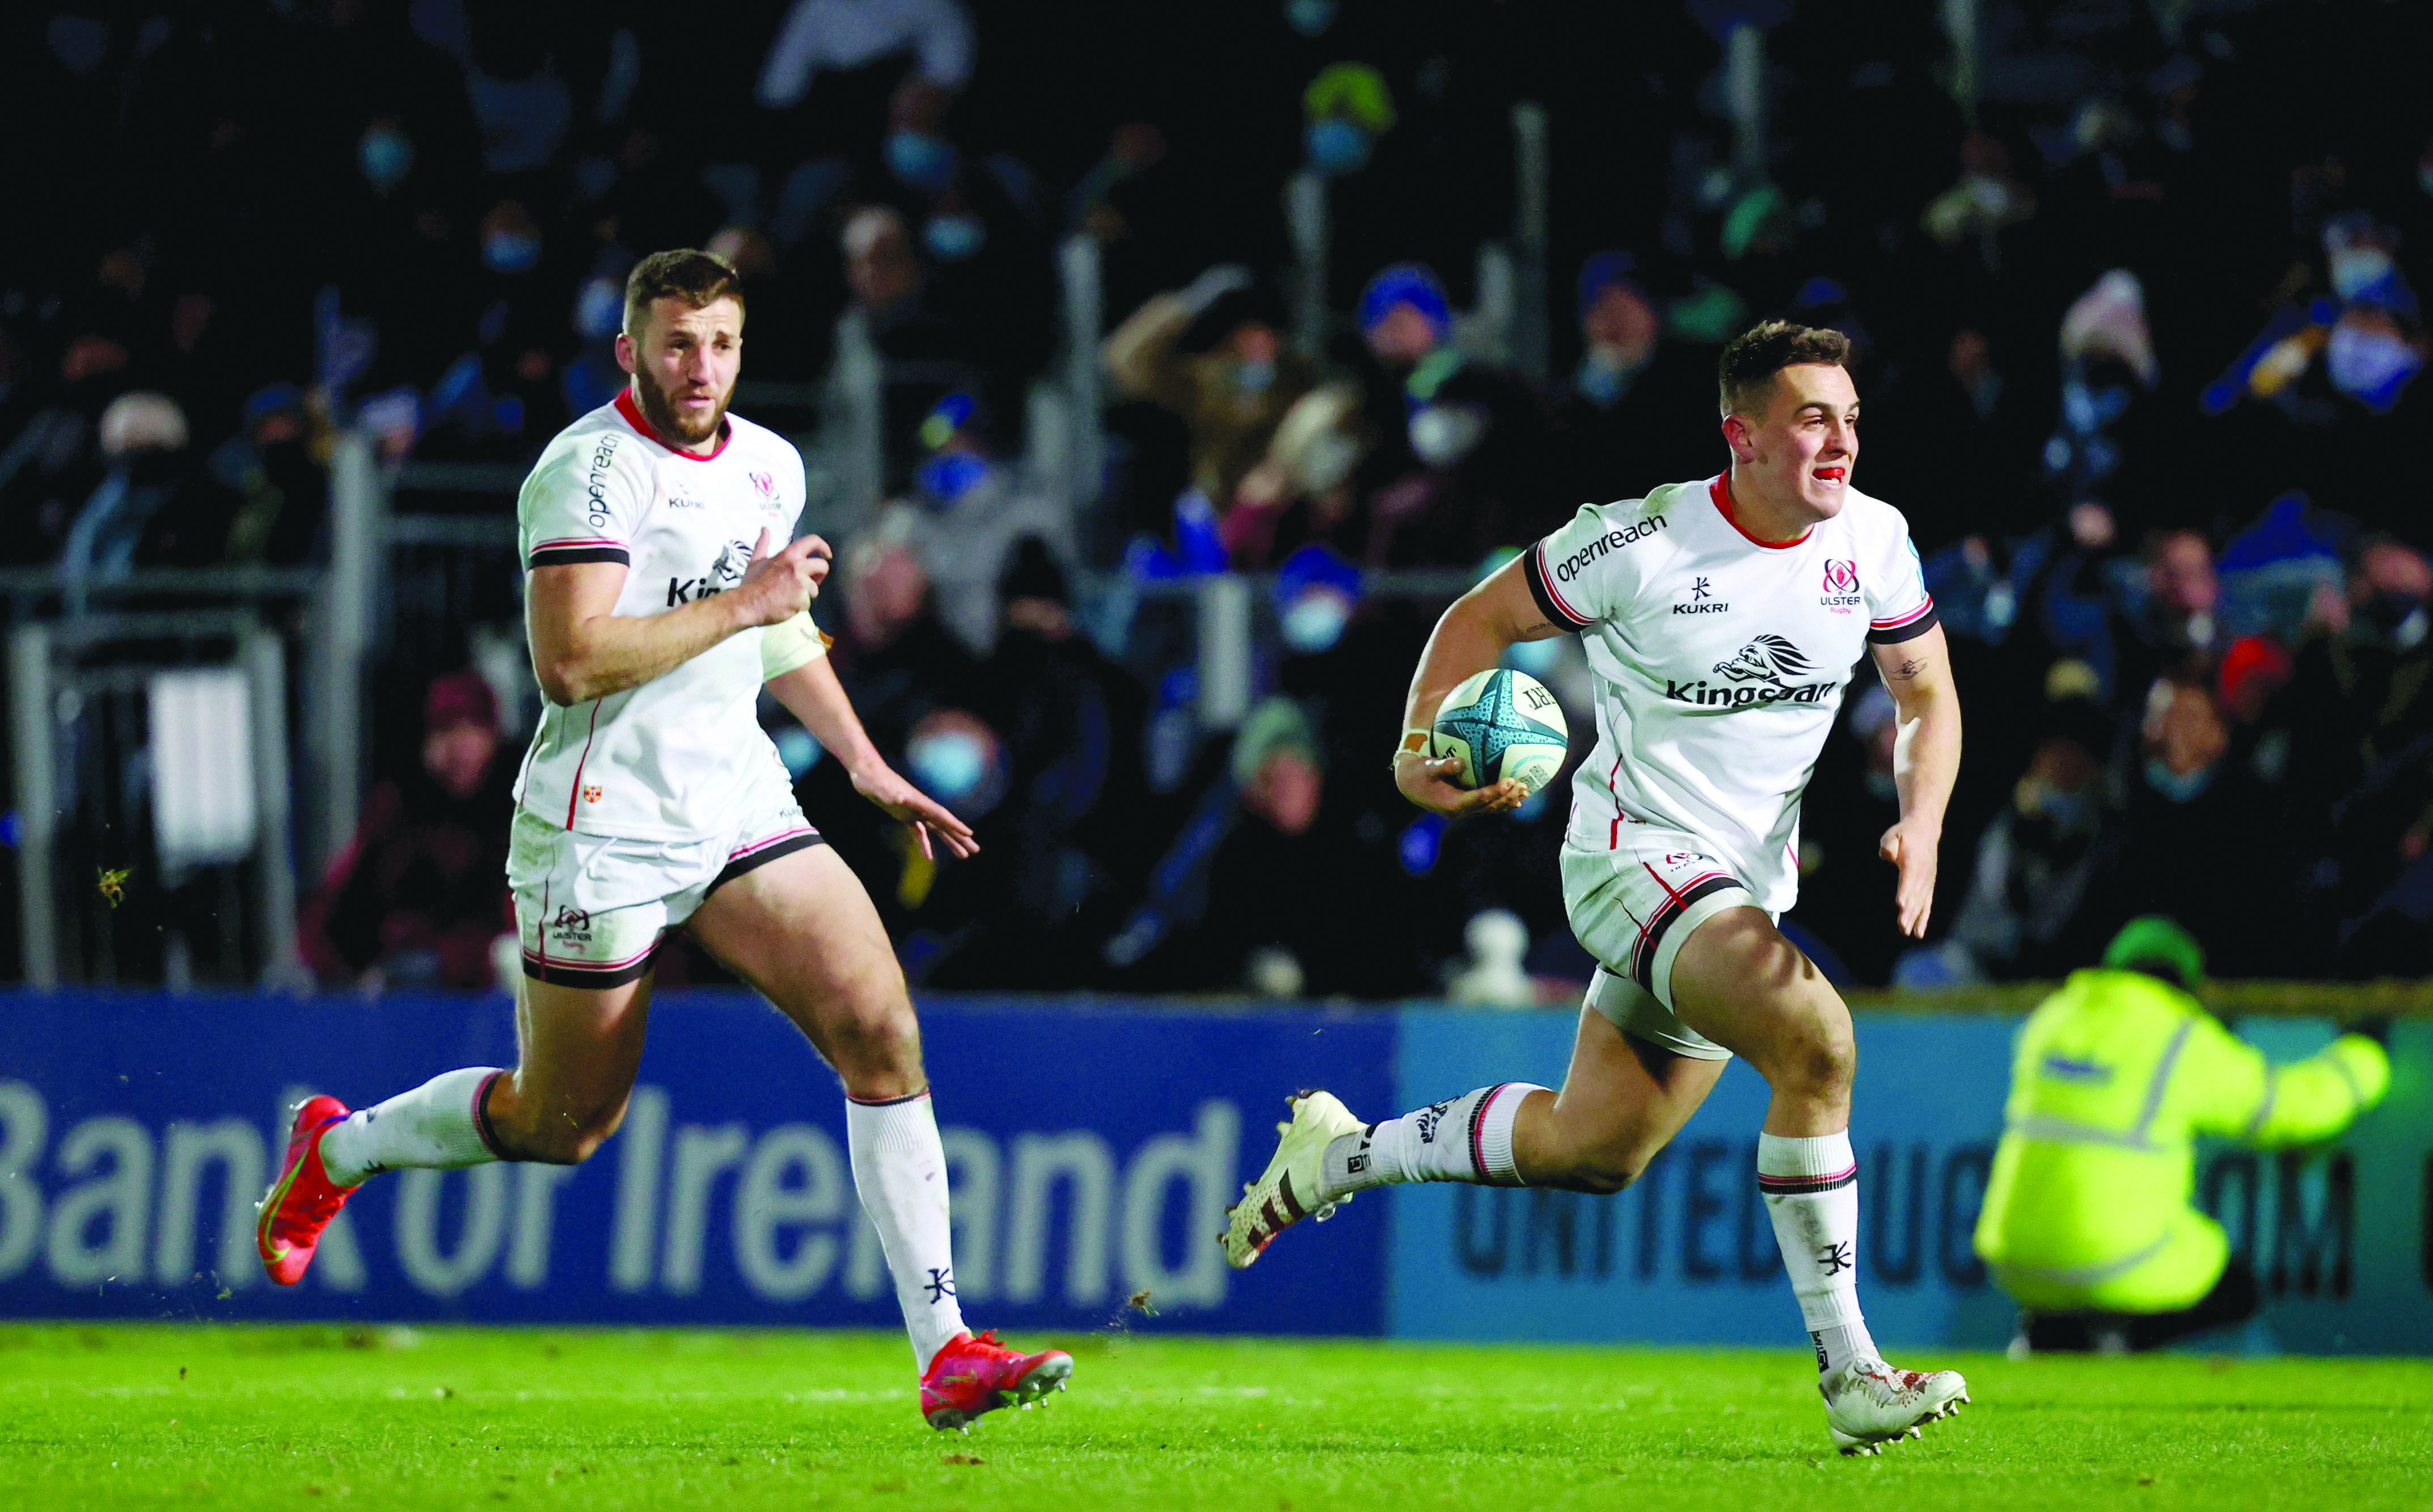 James Hume crosses for the insurance try when Ulster defeated Leinster at the RDS back in November